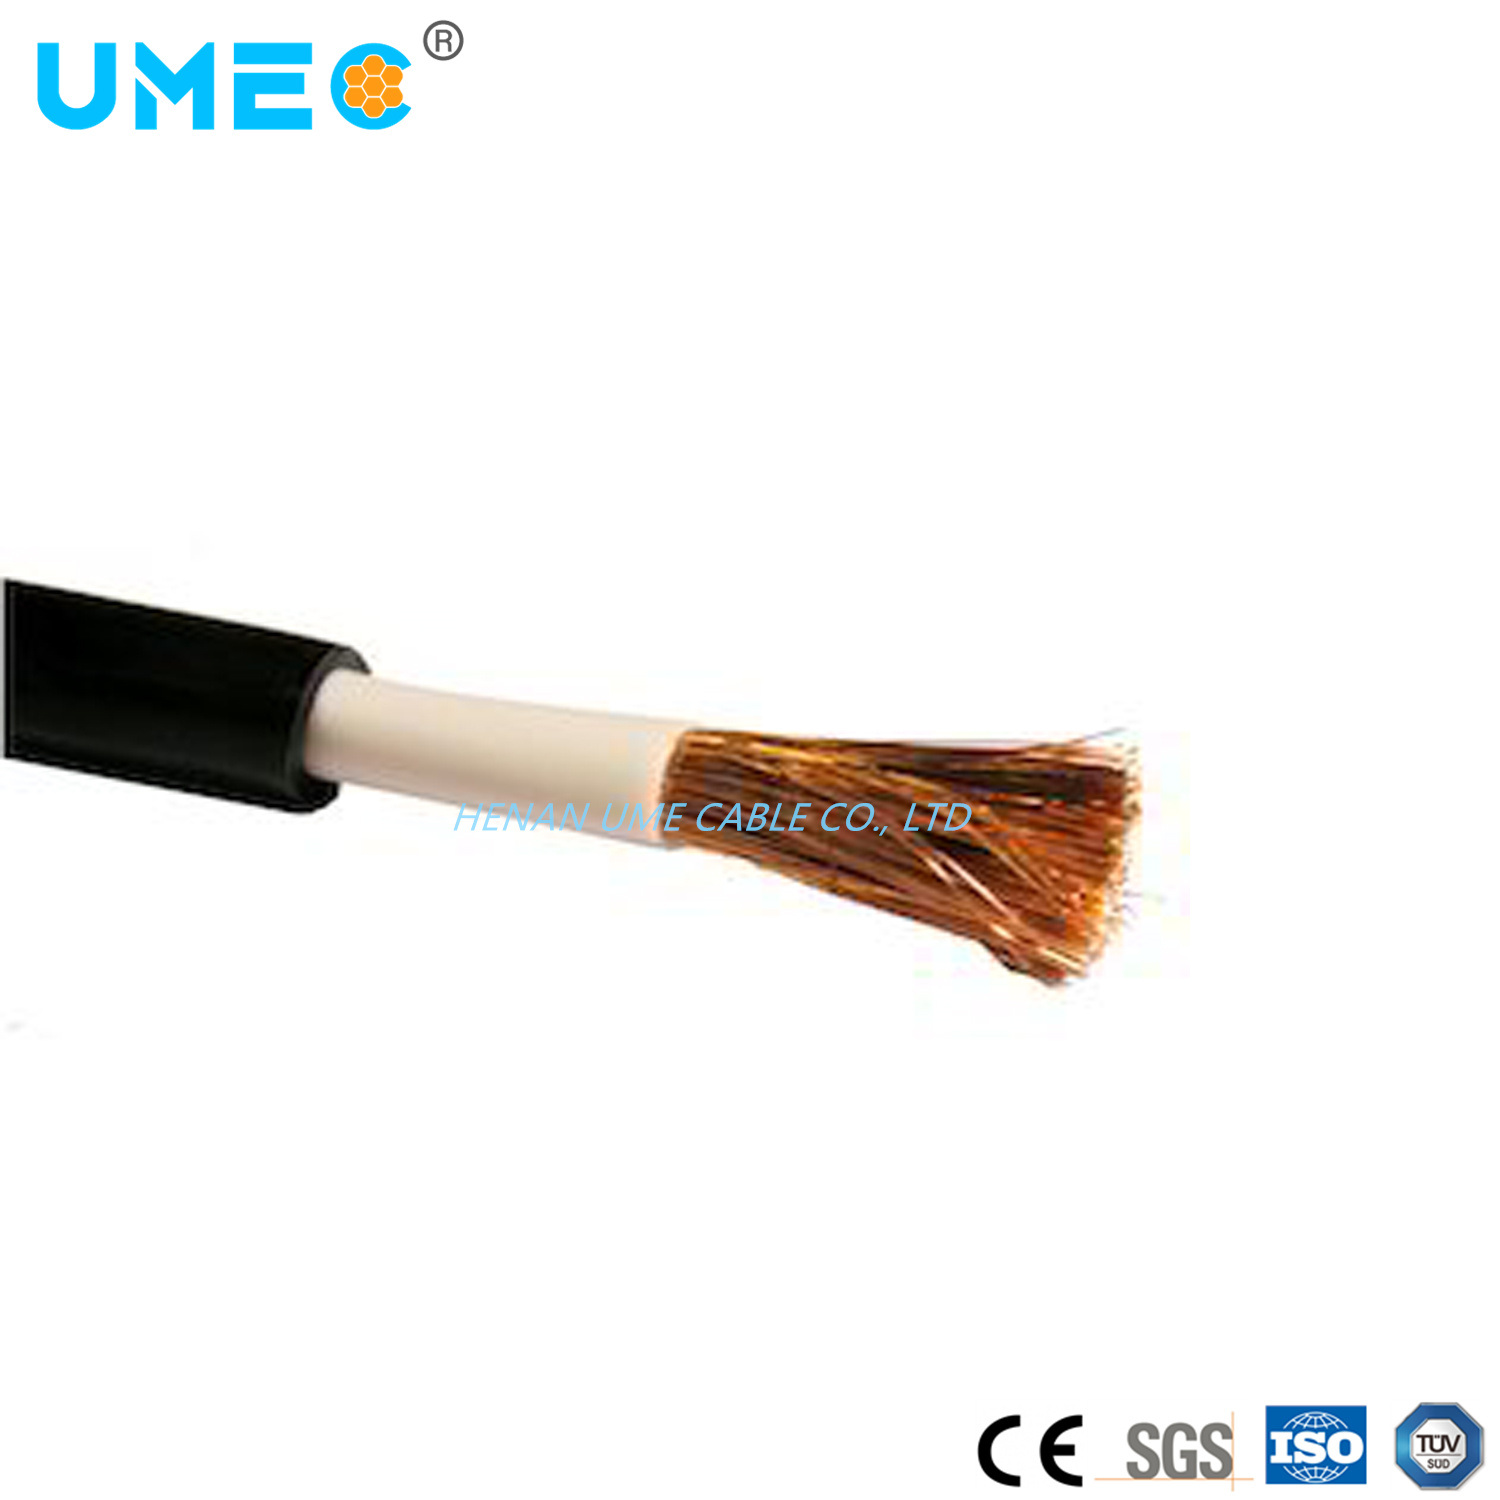 Electric Industrial Welding Cable 6AWG to 500mcm Class K Class M with Neoprene/Silicone Sheathed Flexible Copper Rubber Cable